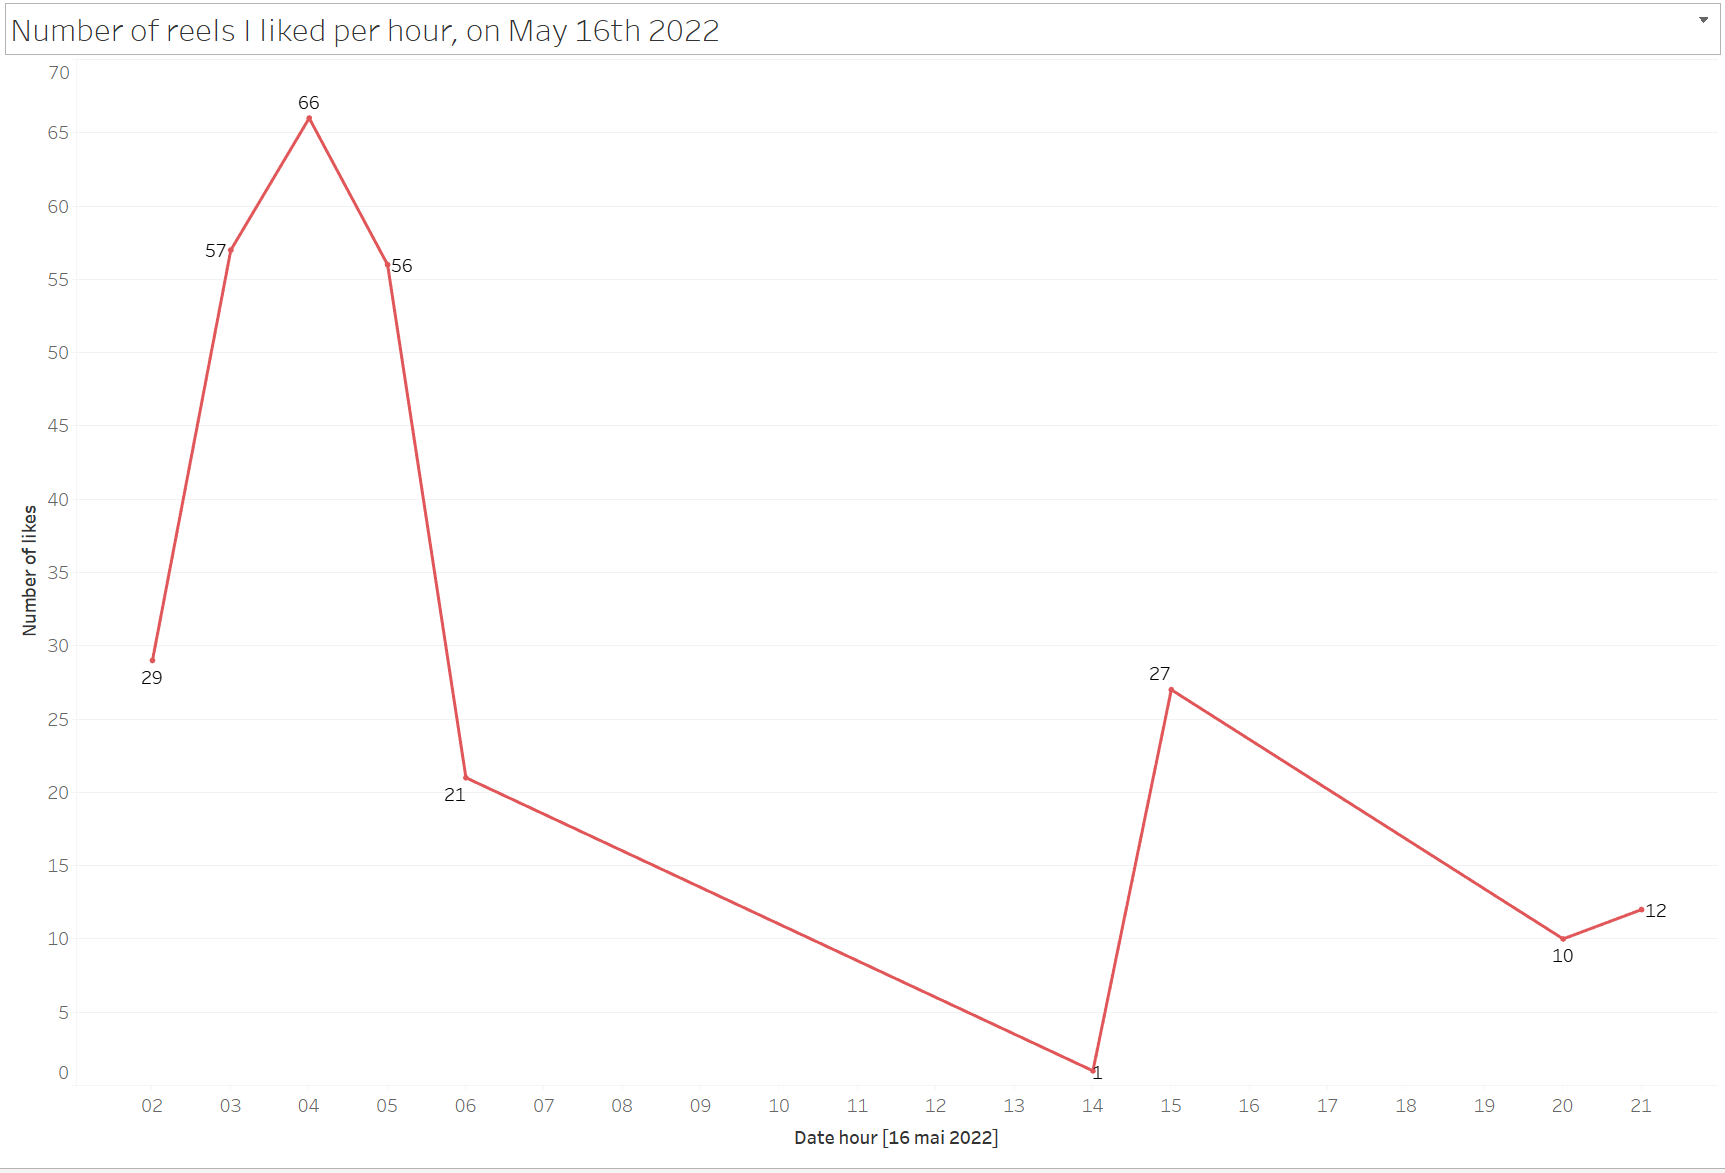 Number of reels I liked per hour on may 16th 2022